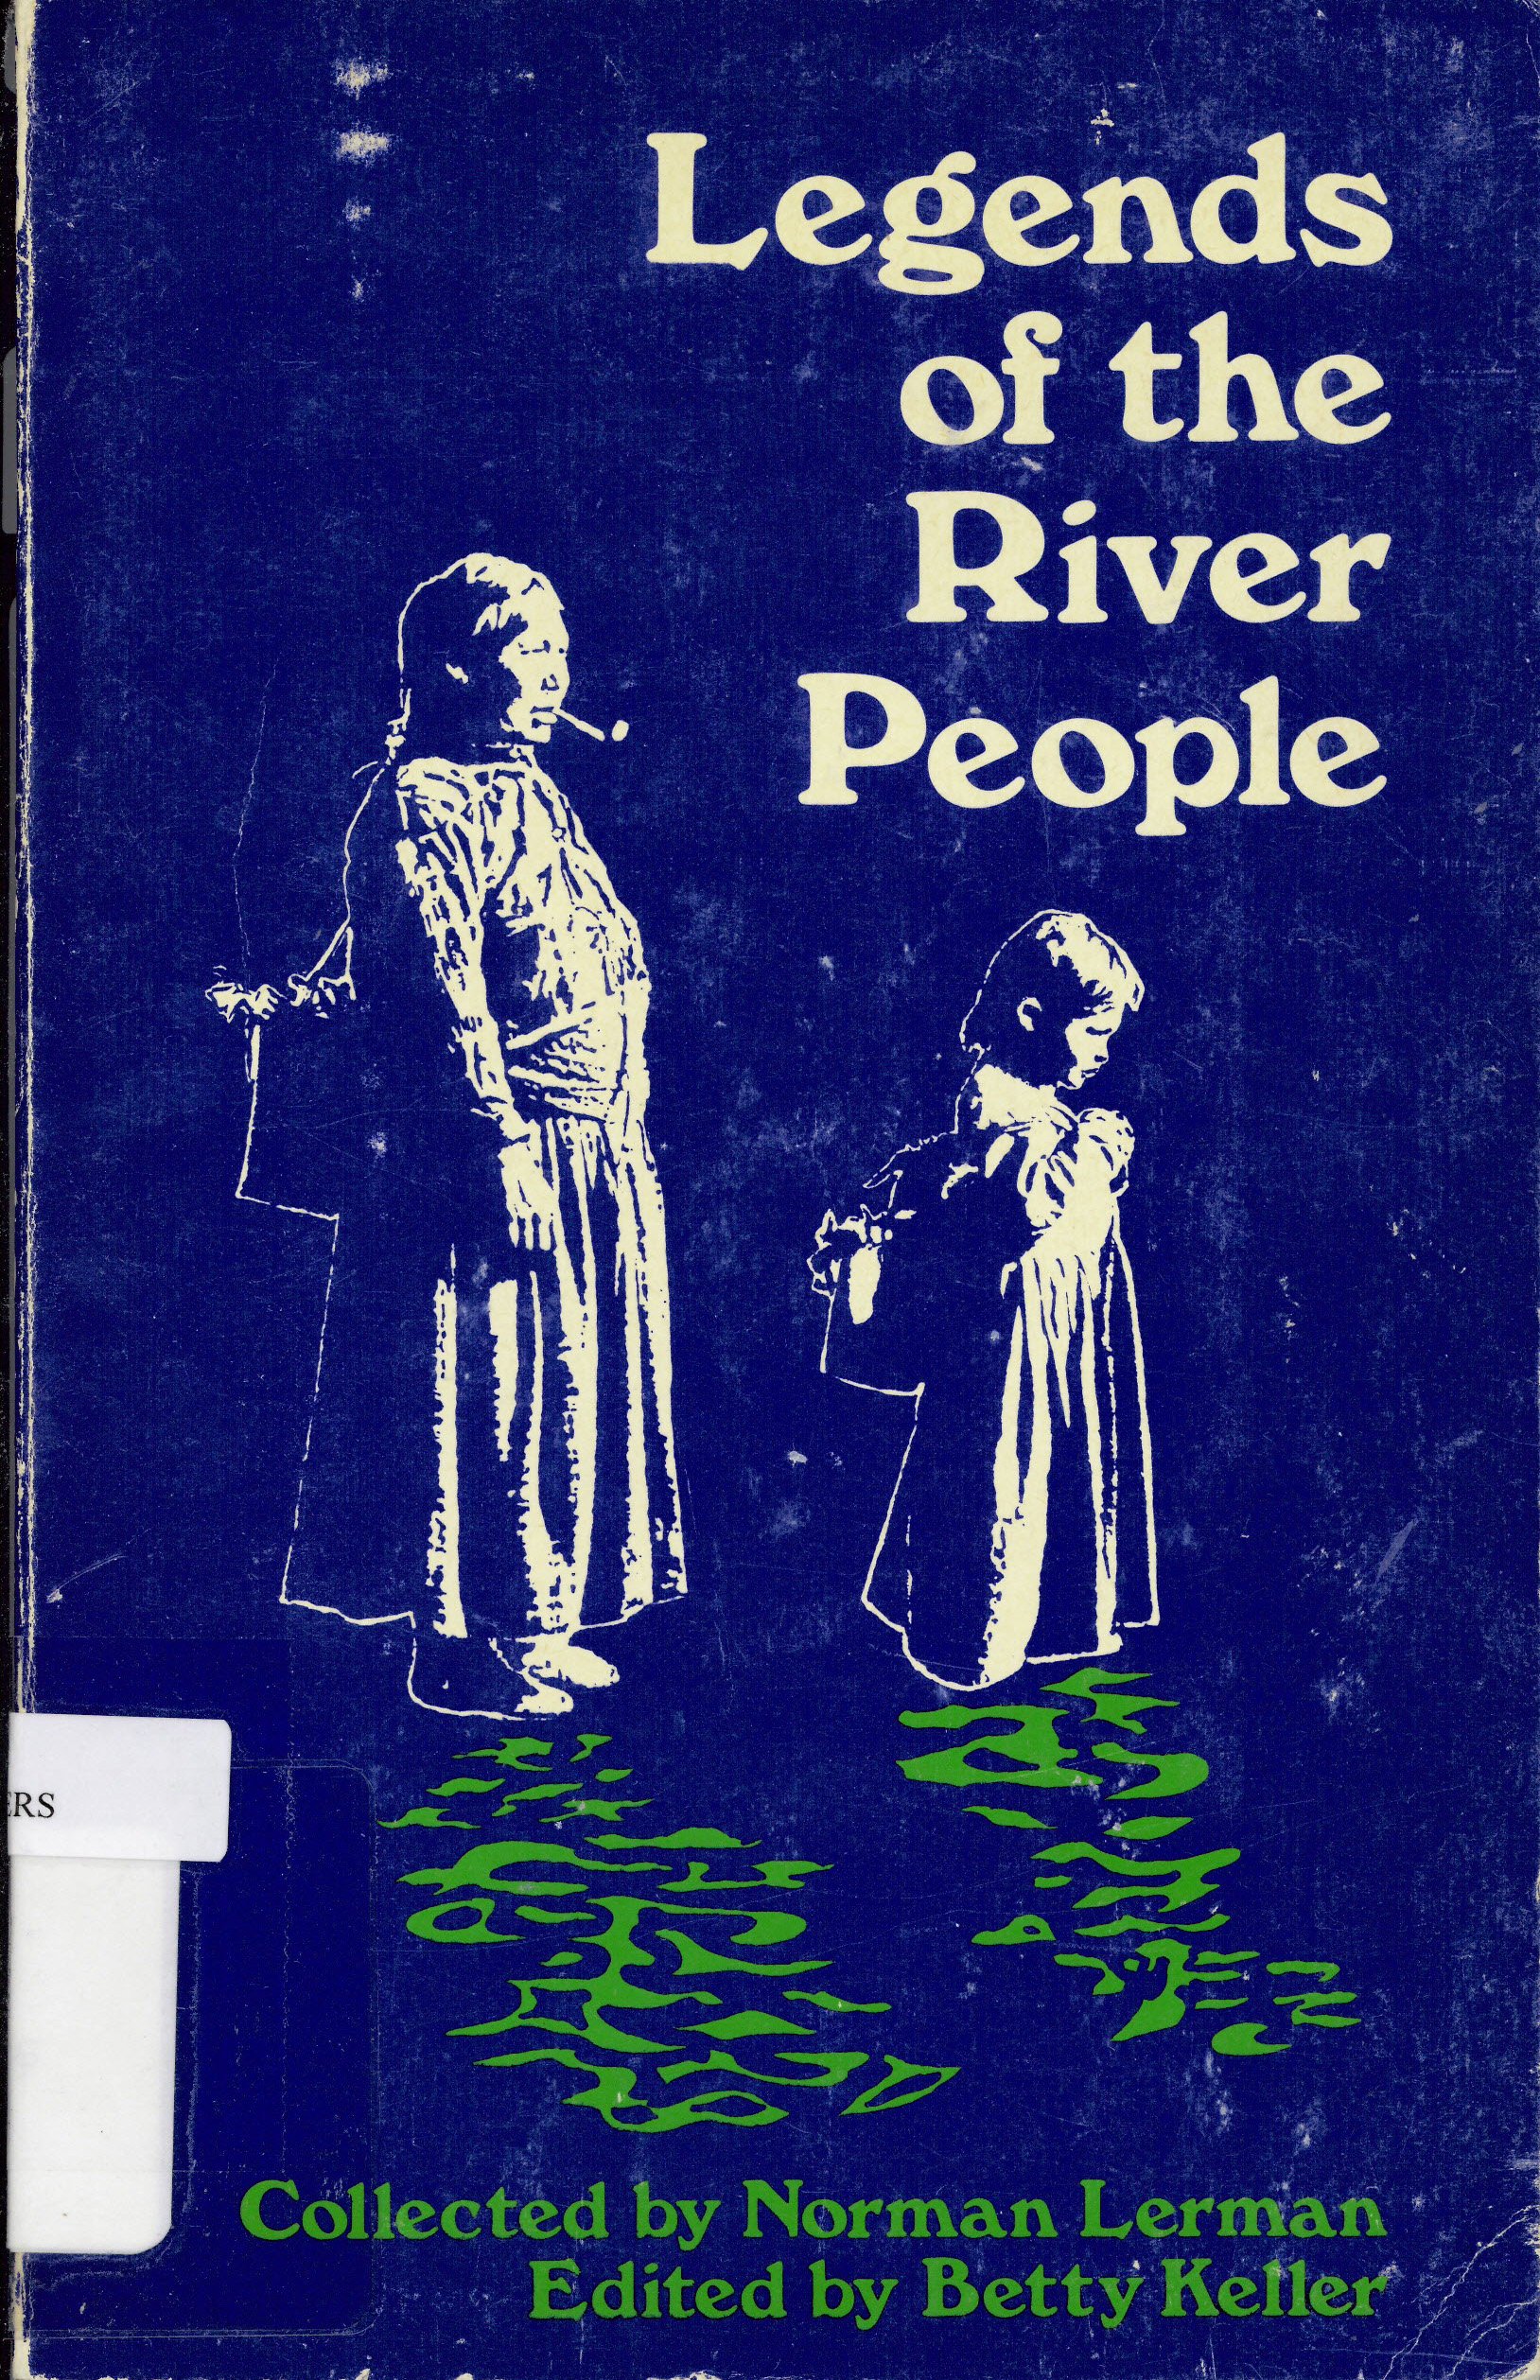 Legends of the river people.